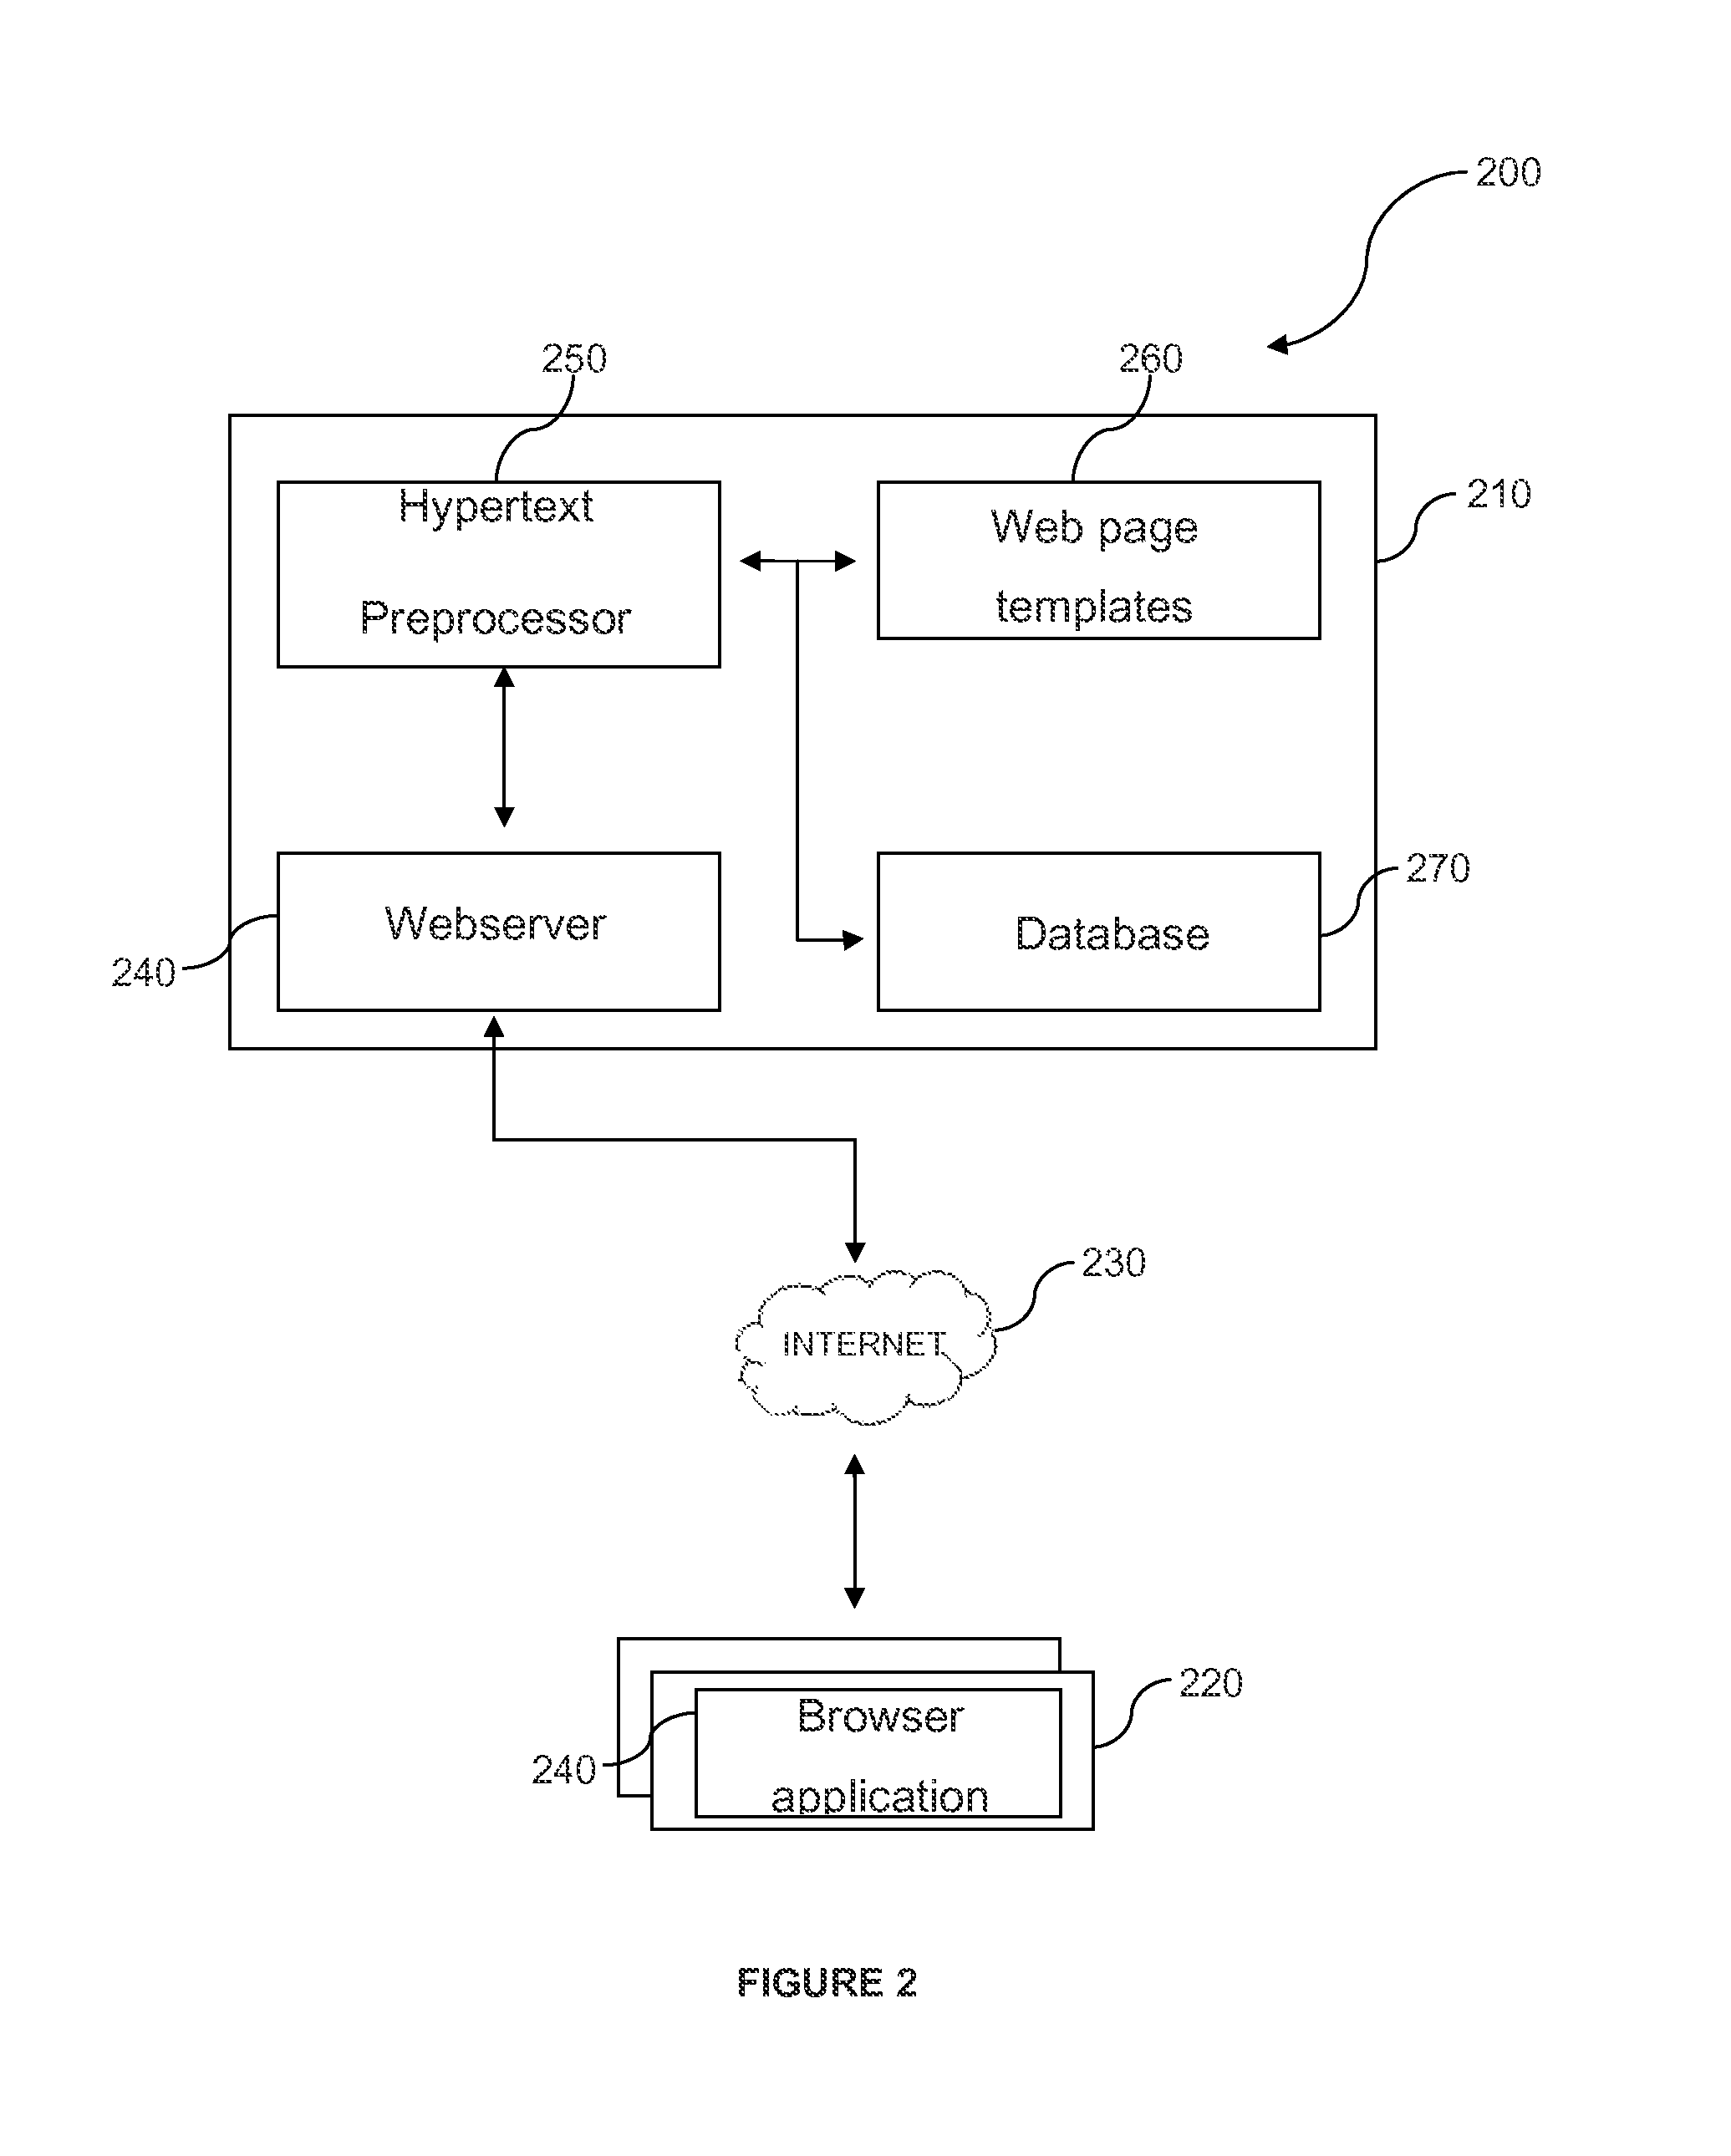 Computer-implemented method, a computing device and a computer readable storage medium for providing alignment information data for the alignment of an orthopaedic implant for a joint of a patient